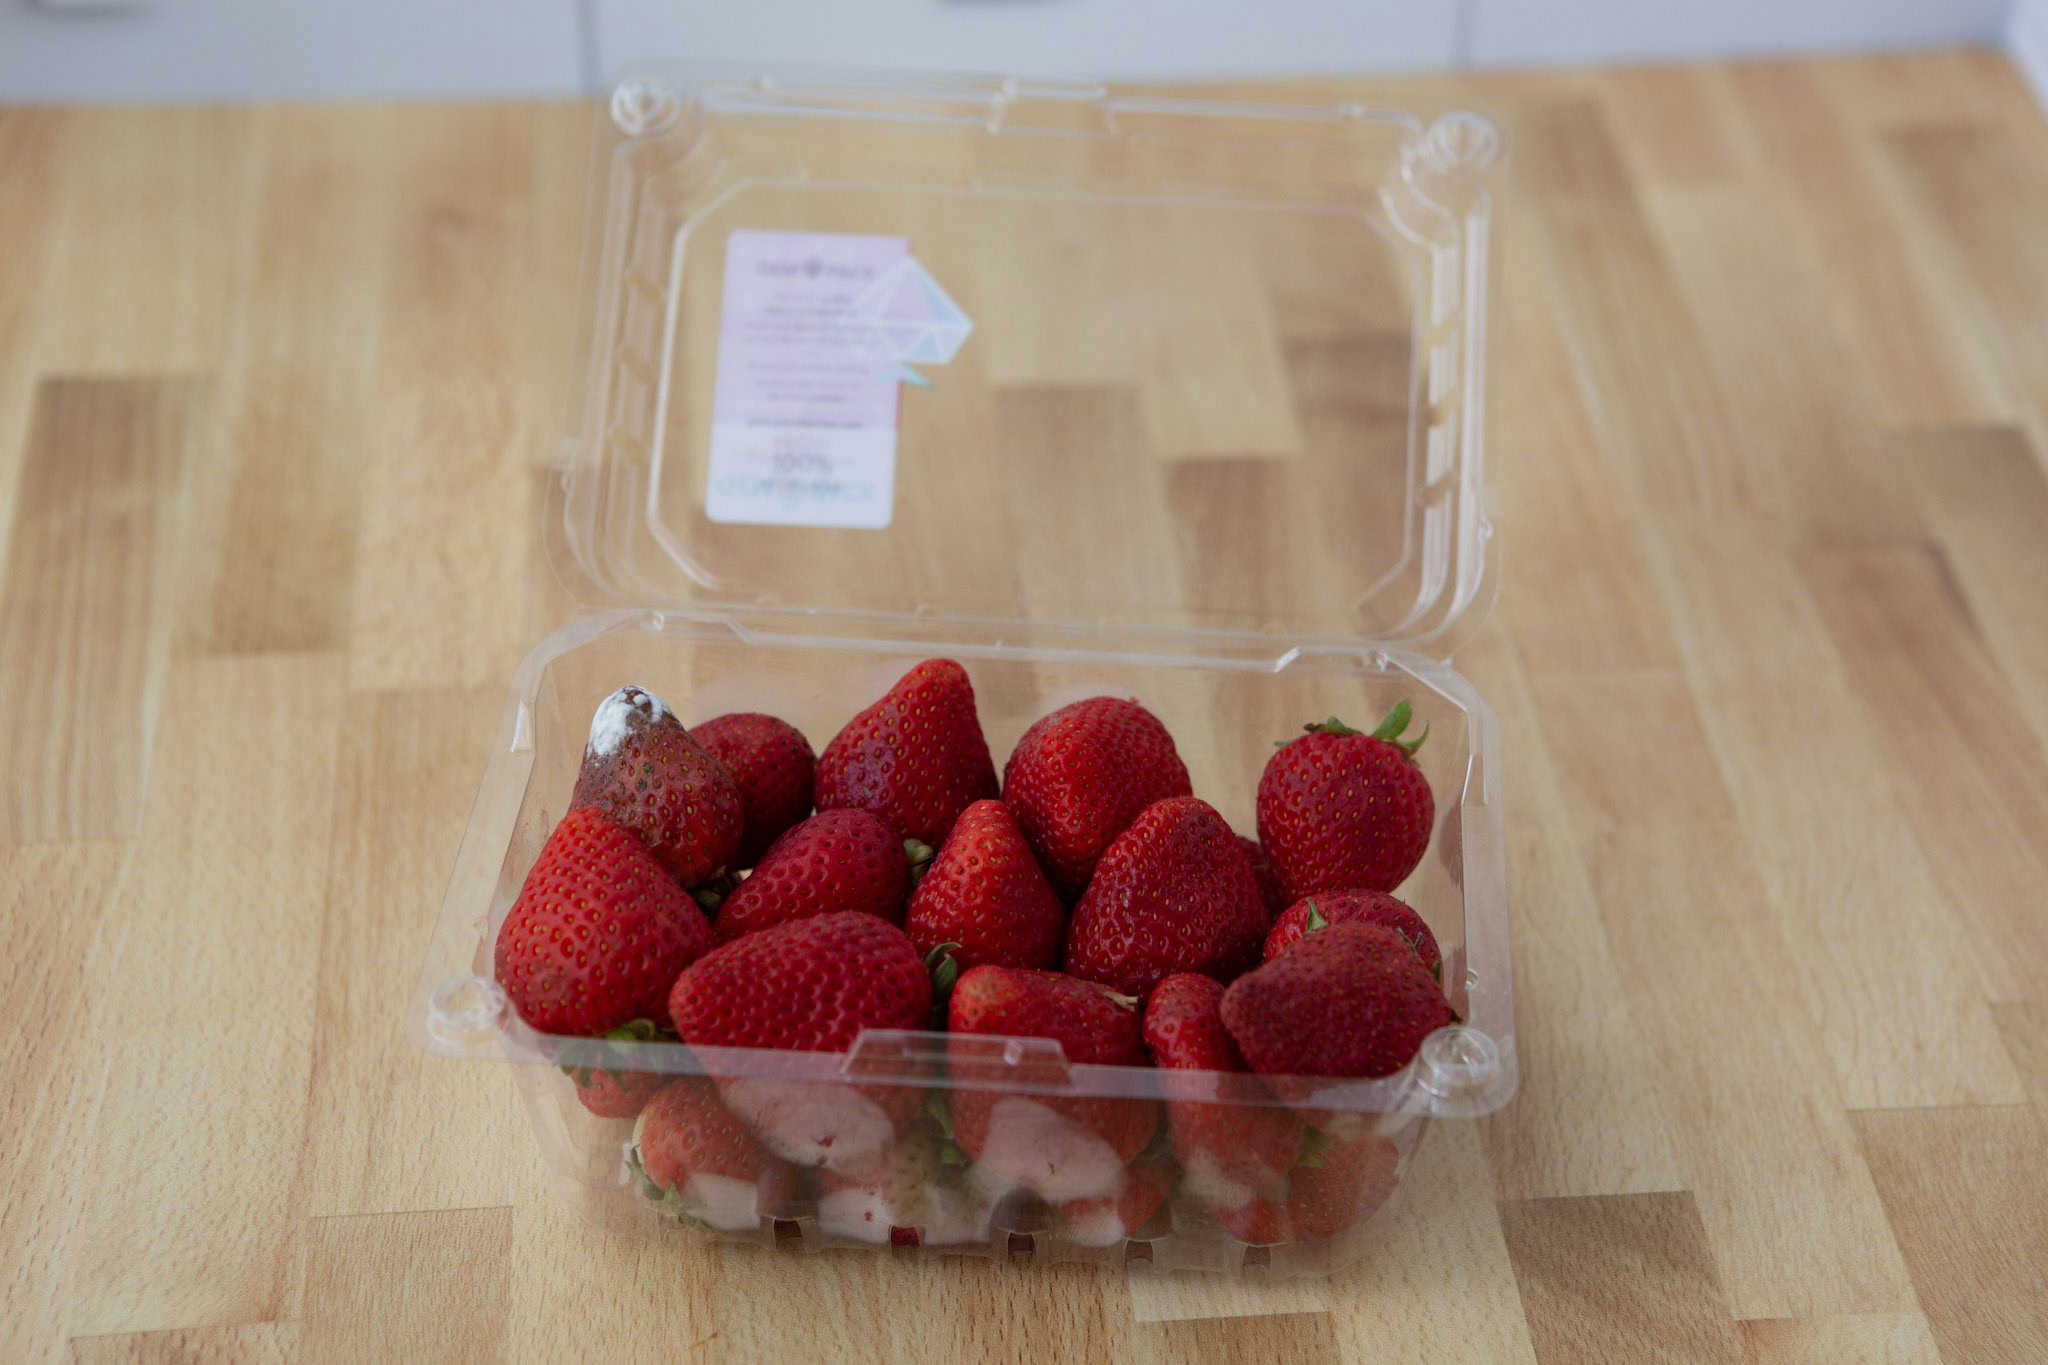 moldy strawberries in plastic container